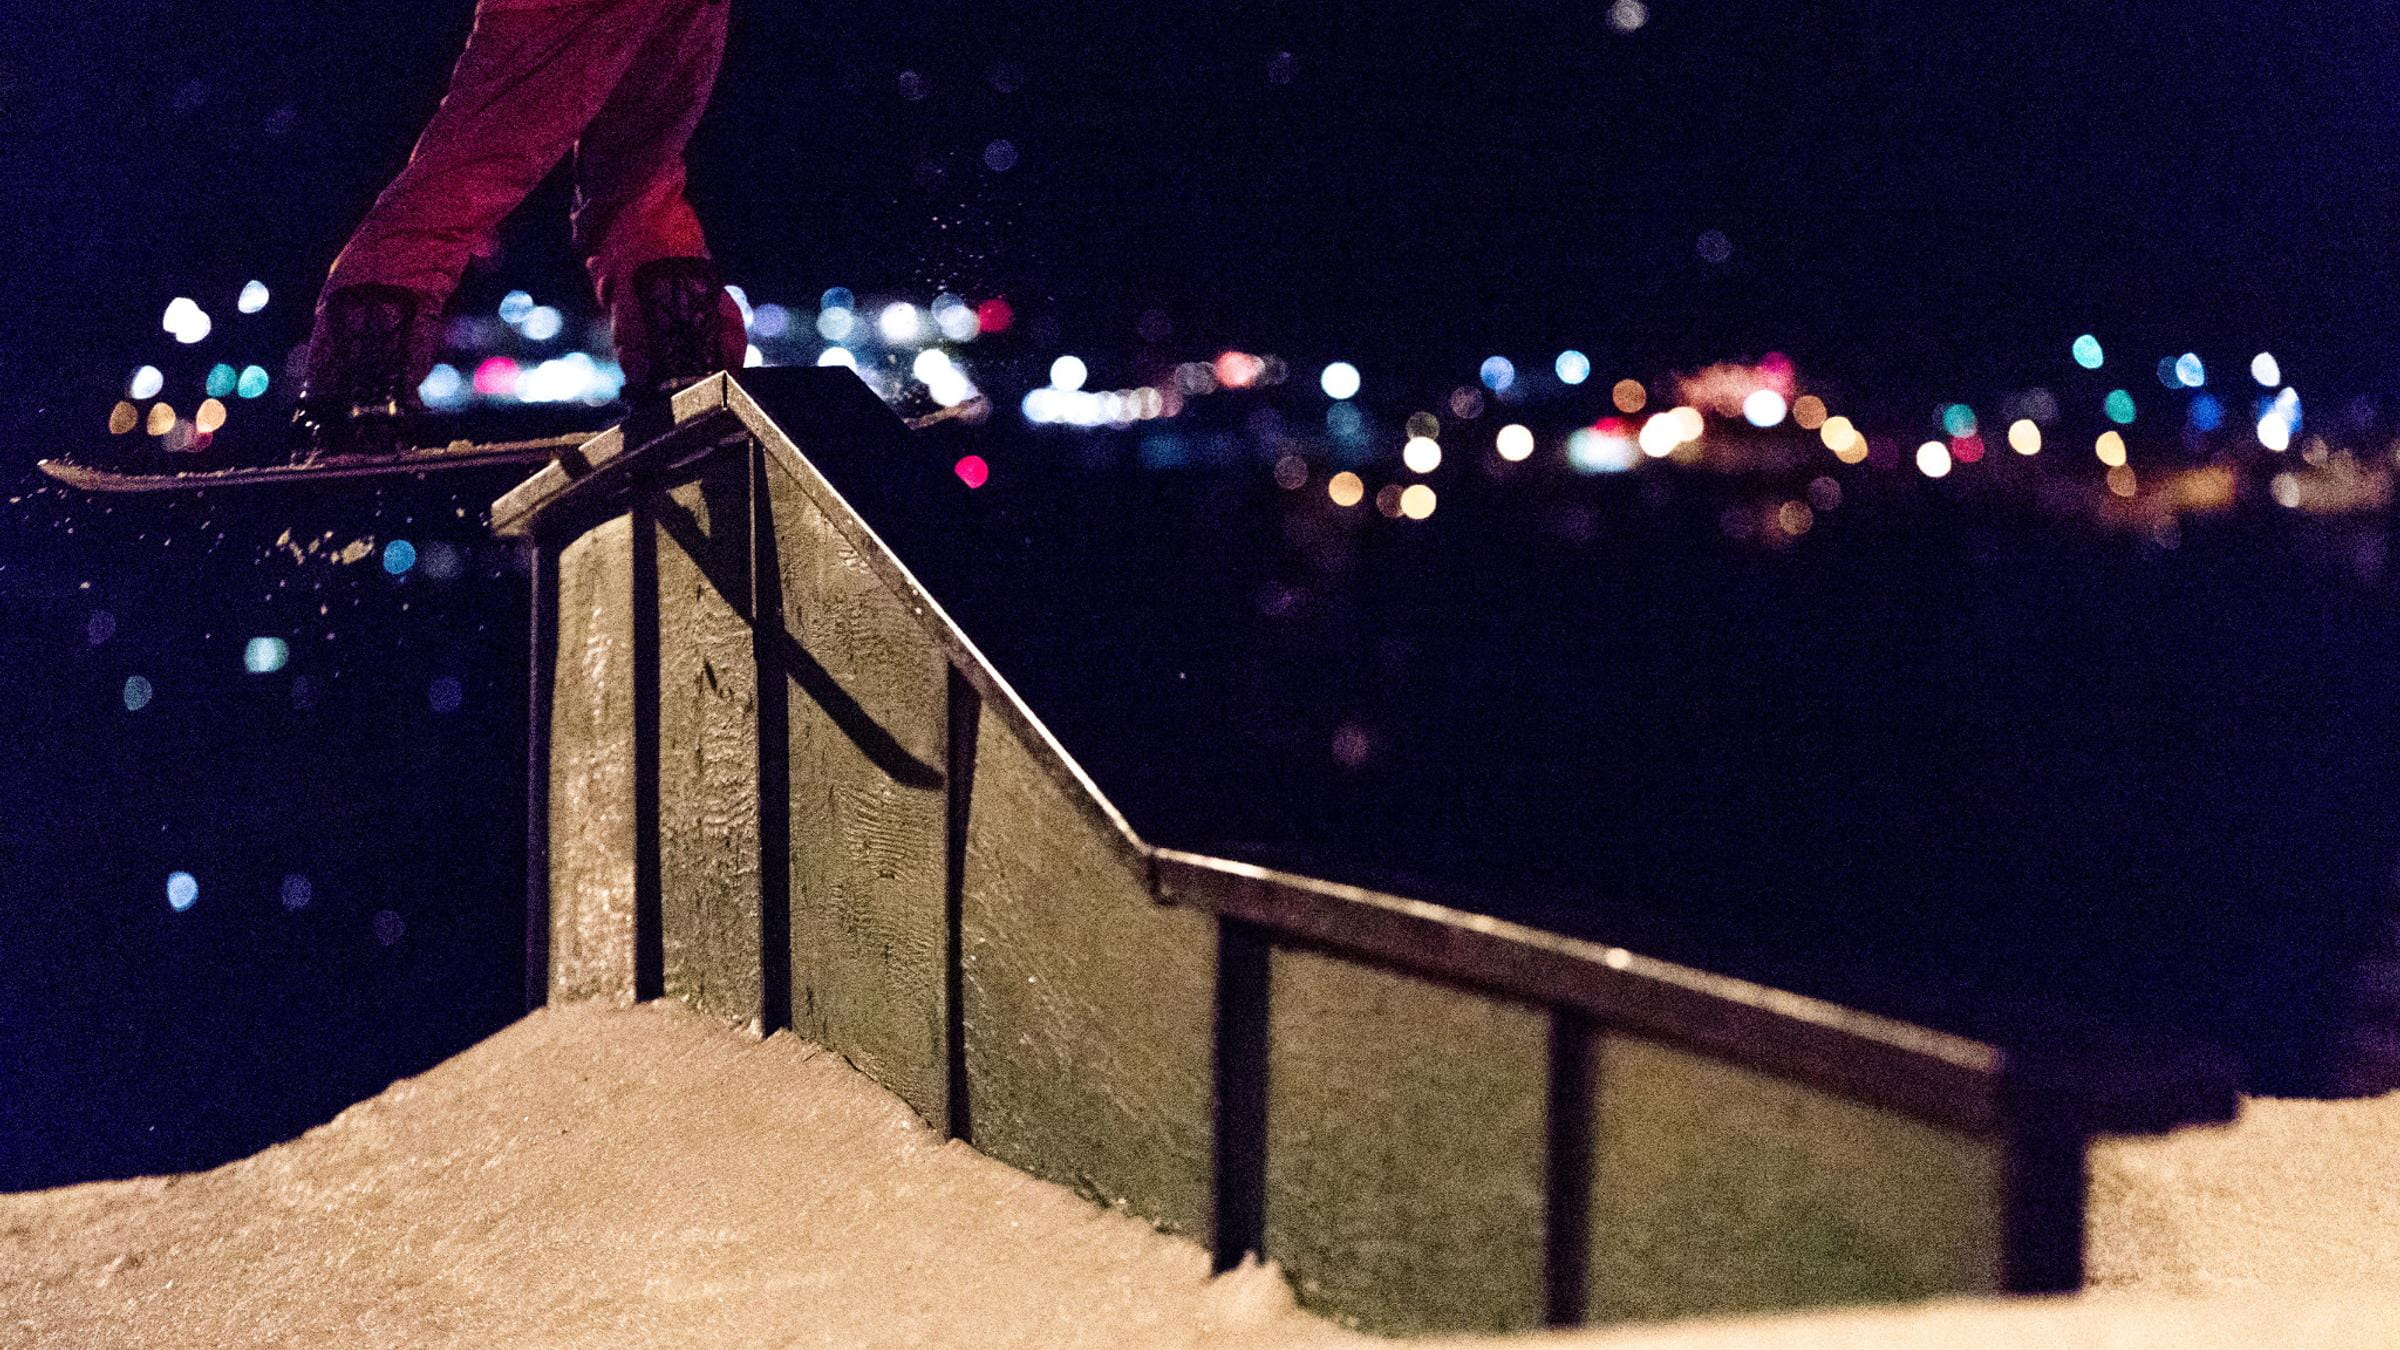 Snowboarder on a rail at night